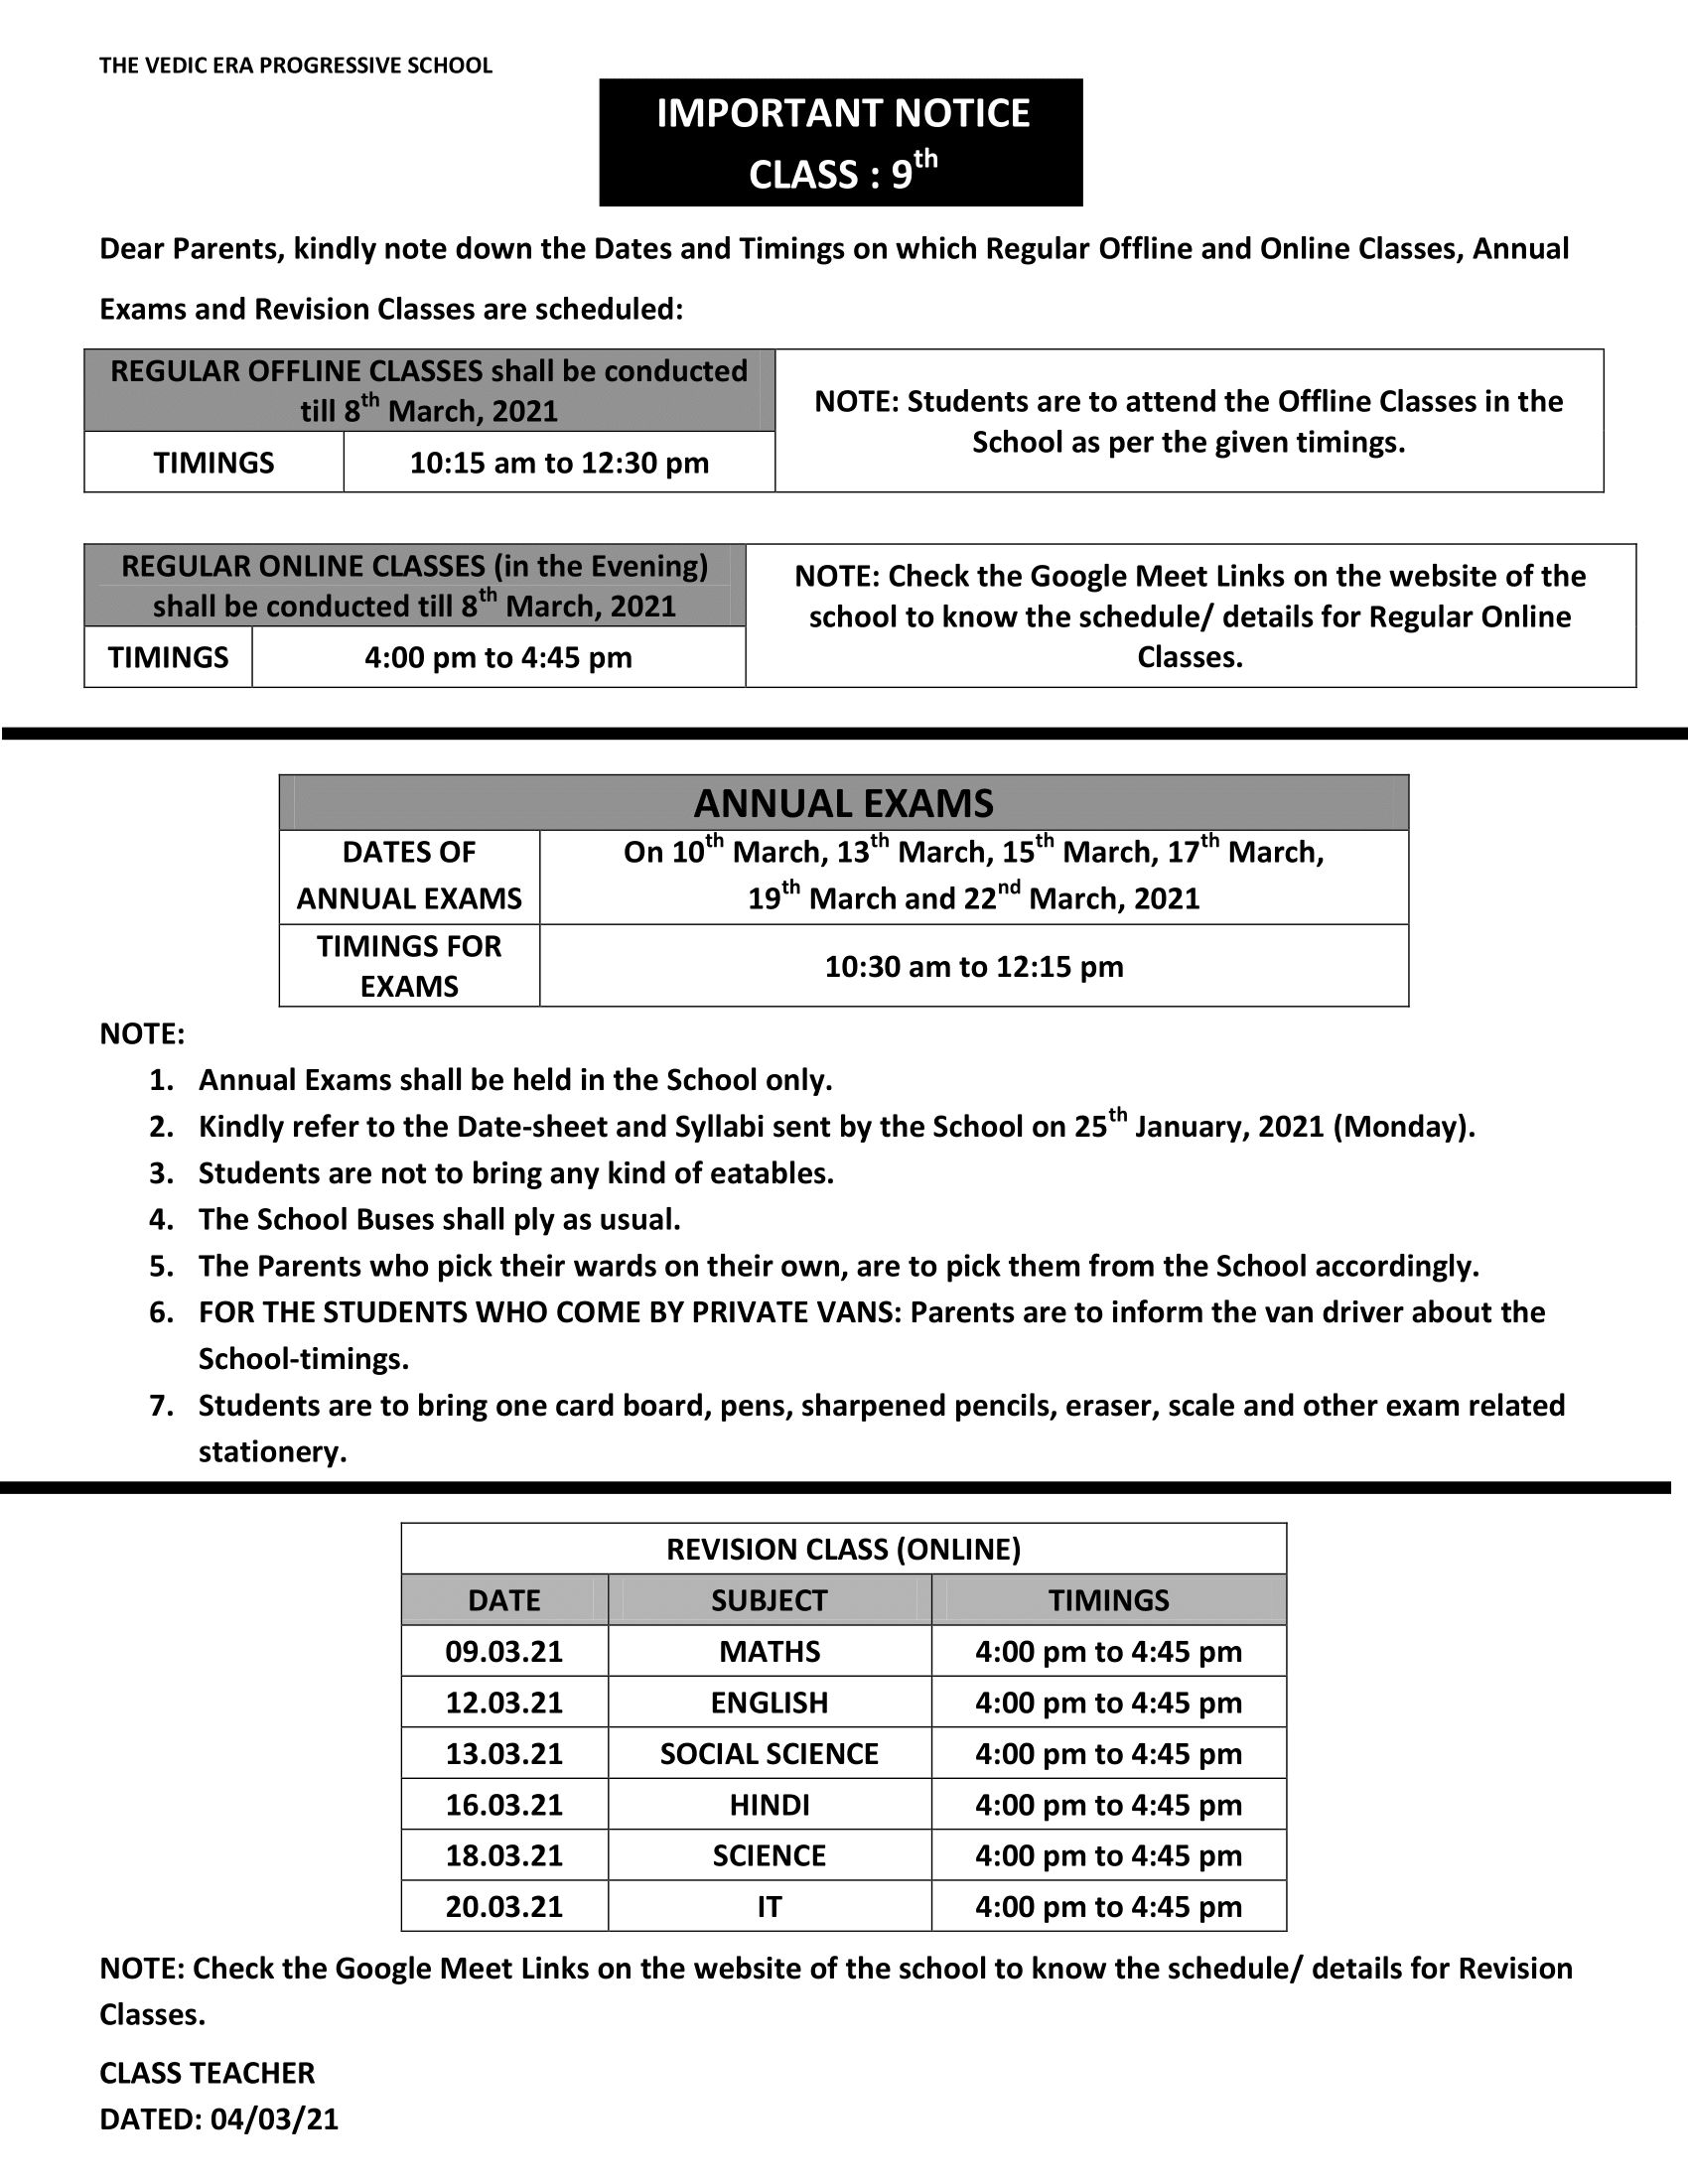 DATE-SHEET AND SYLLABI FOR ANNUAL EXAMS